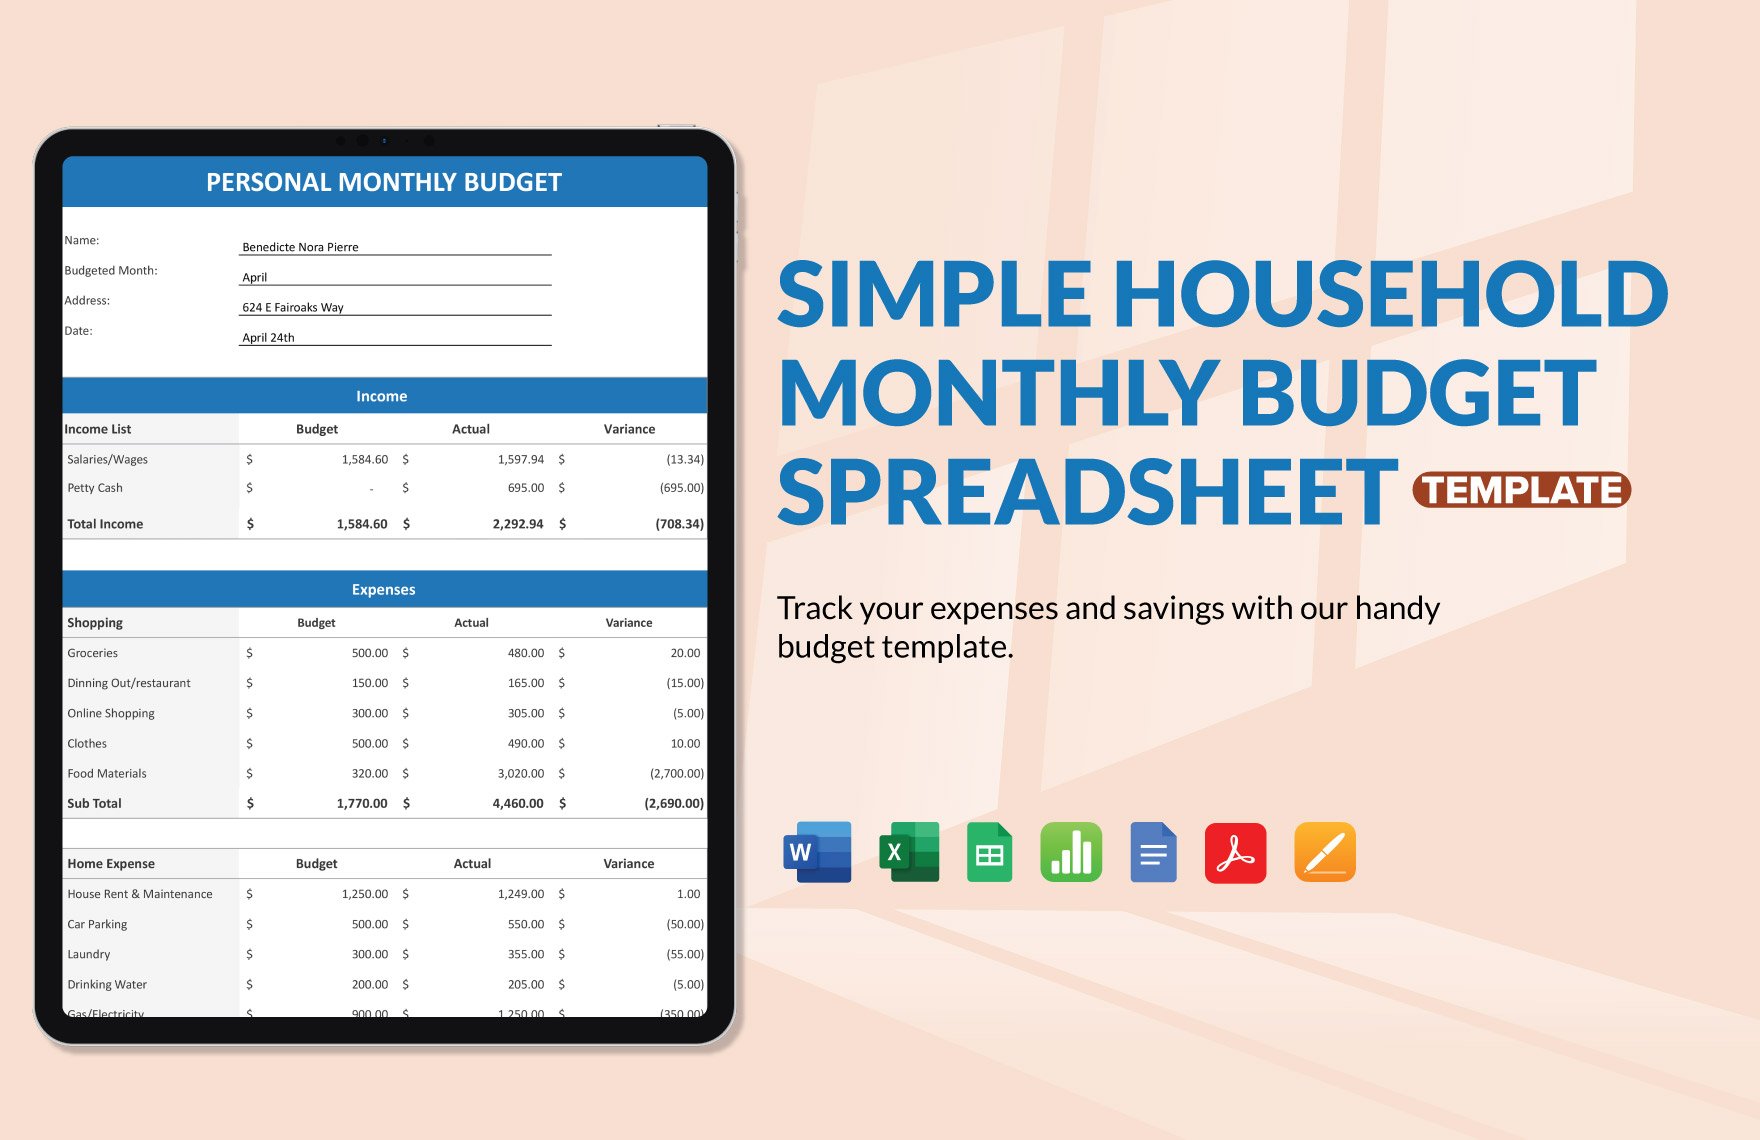 Simple Household Monthly Budget Spreadsheet Template